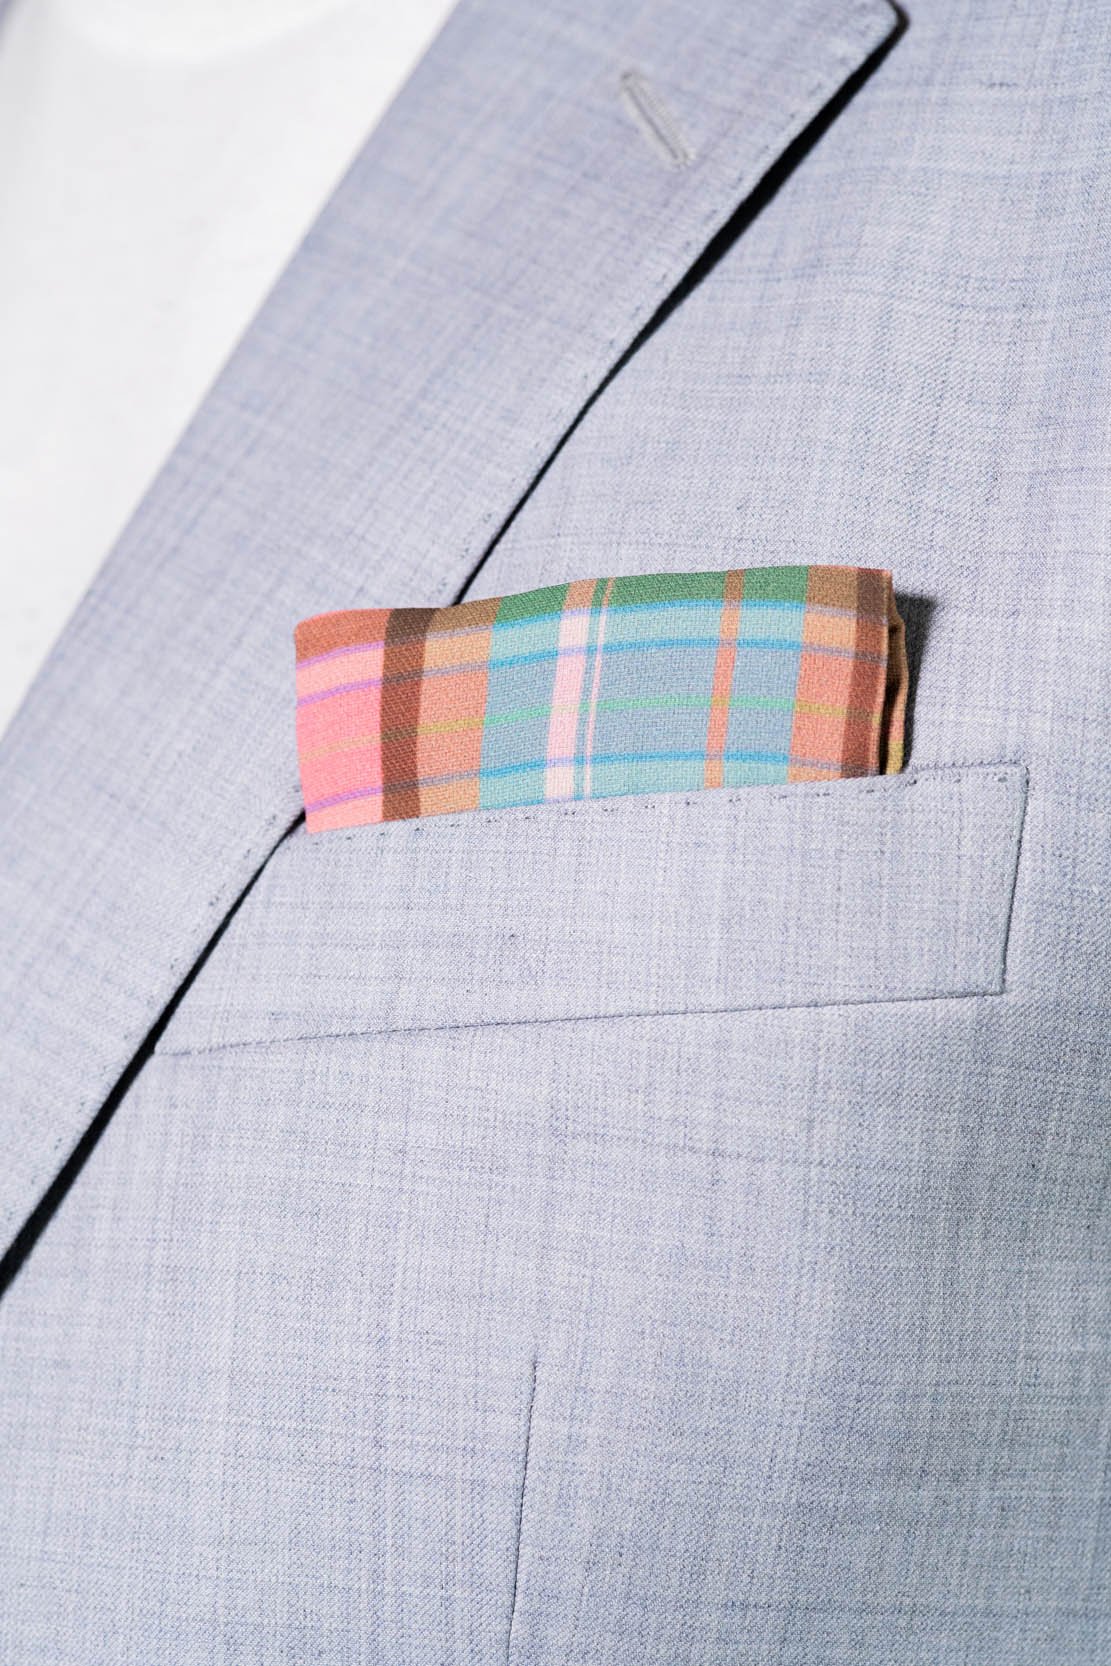 RARE CUT's Rosé All Day Pocket Square Worn in a Suit Jacket